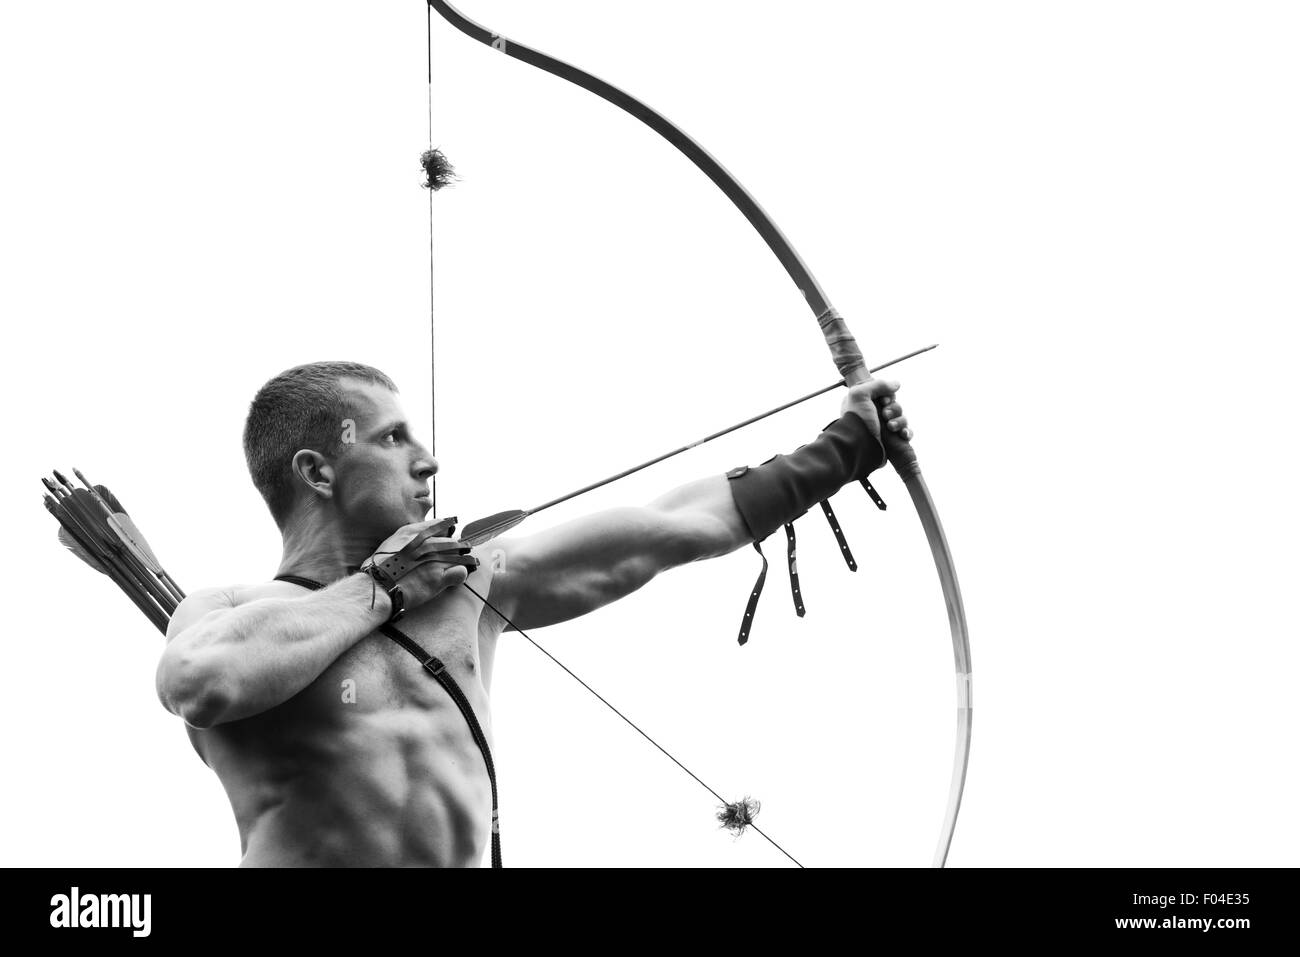 Archery practice Black and White Stock Photos & Images - Alamy